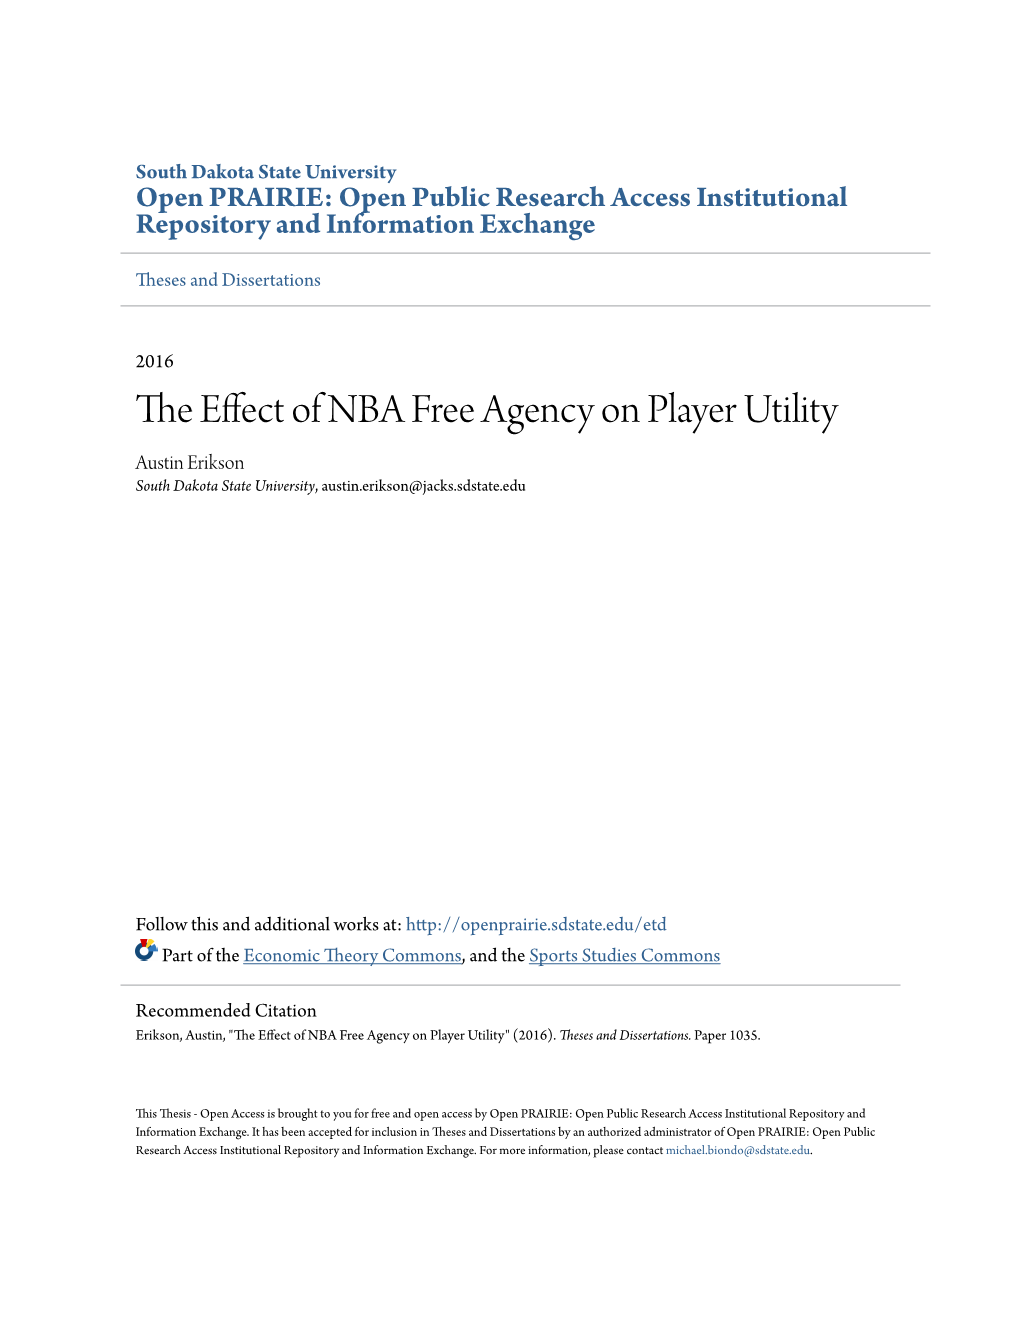 The Effect of NBA Free Agency on Player Utility" (2016)